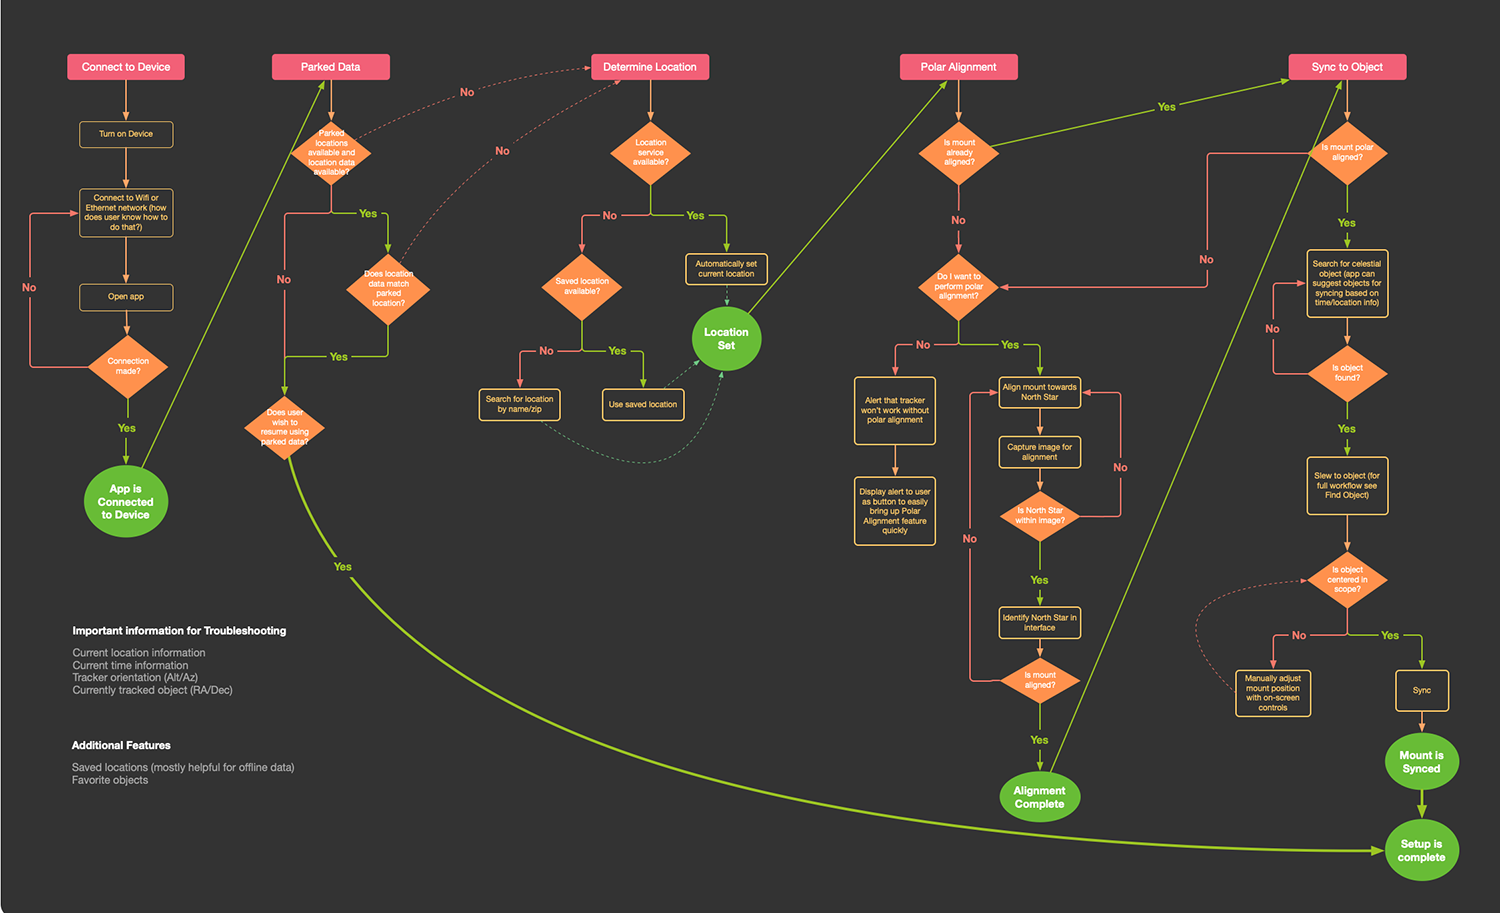 Mapping out the setup workflow